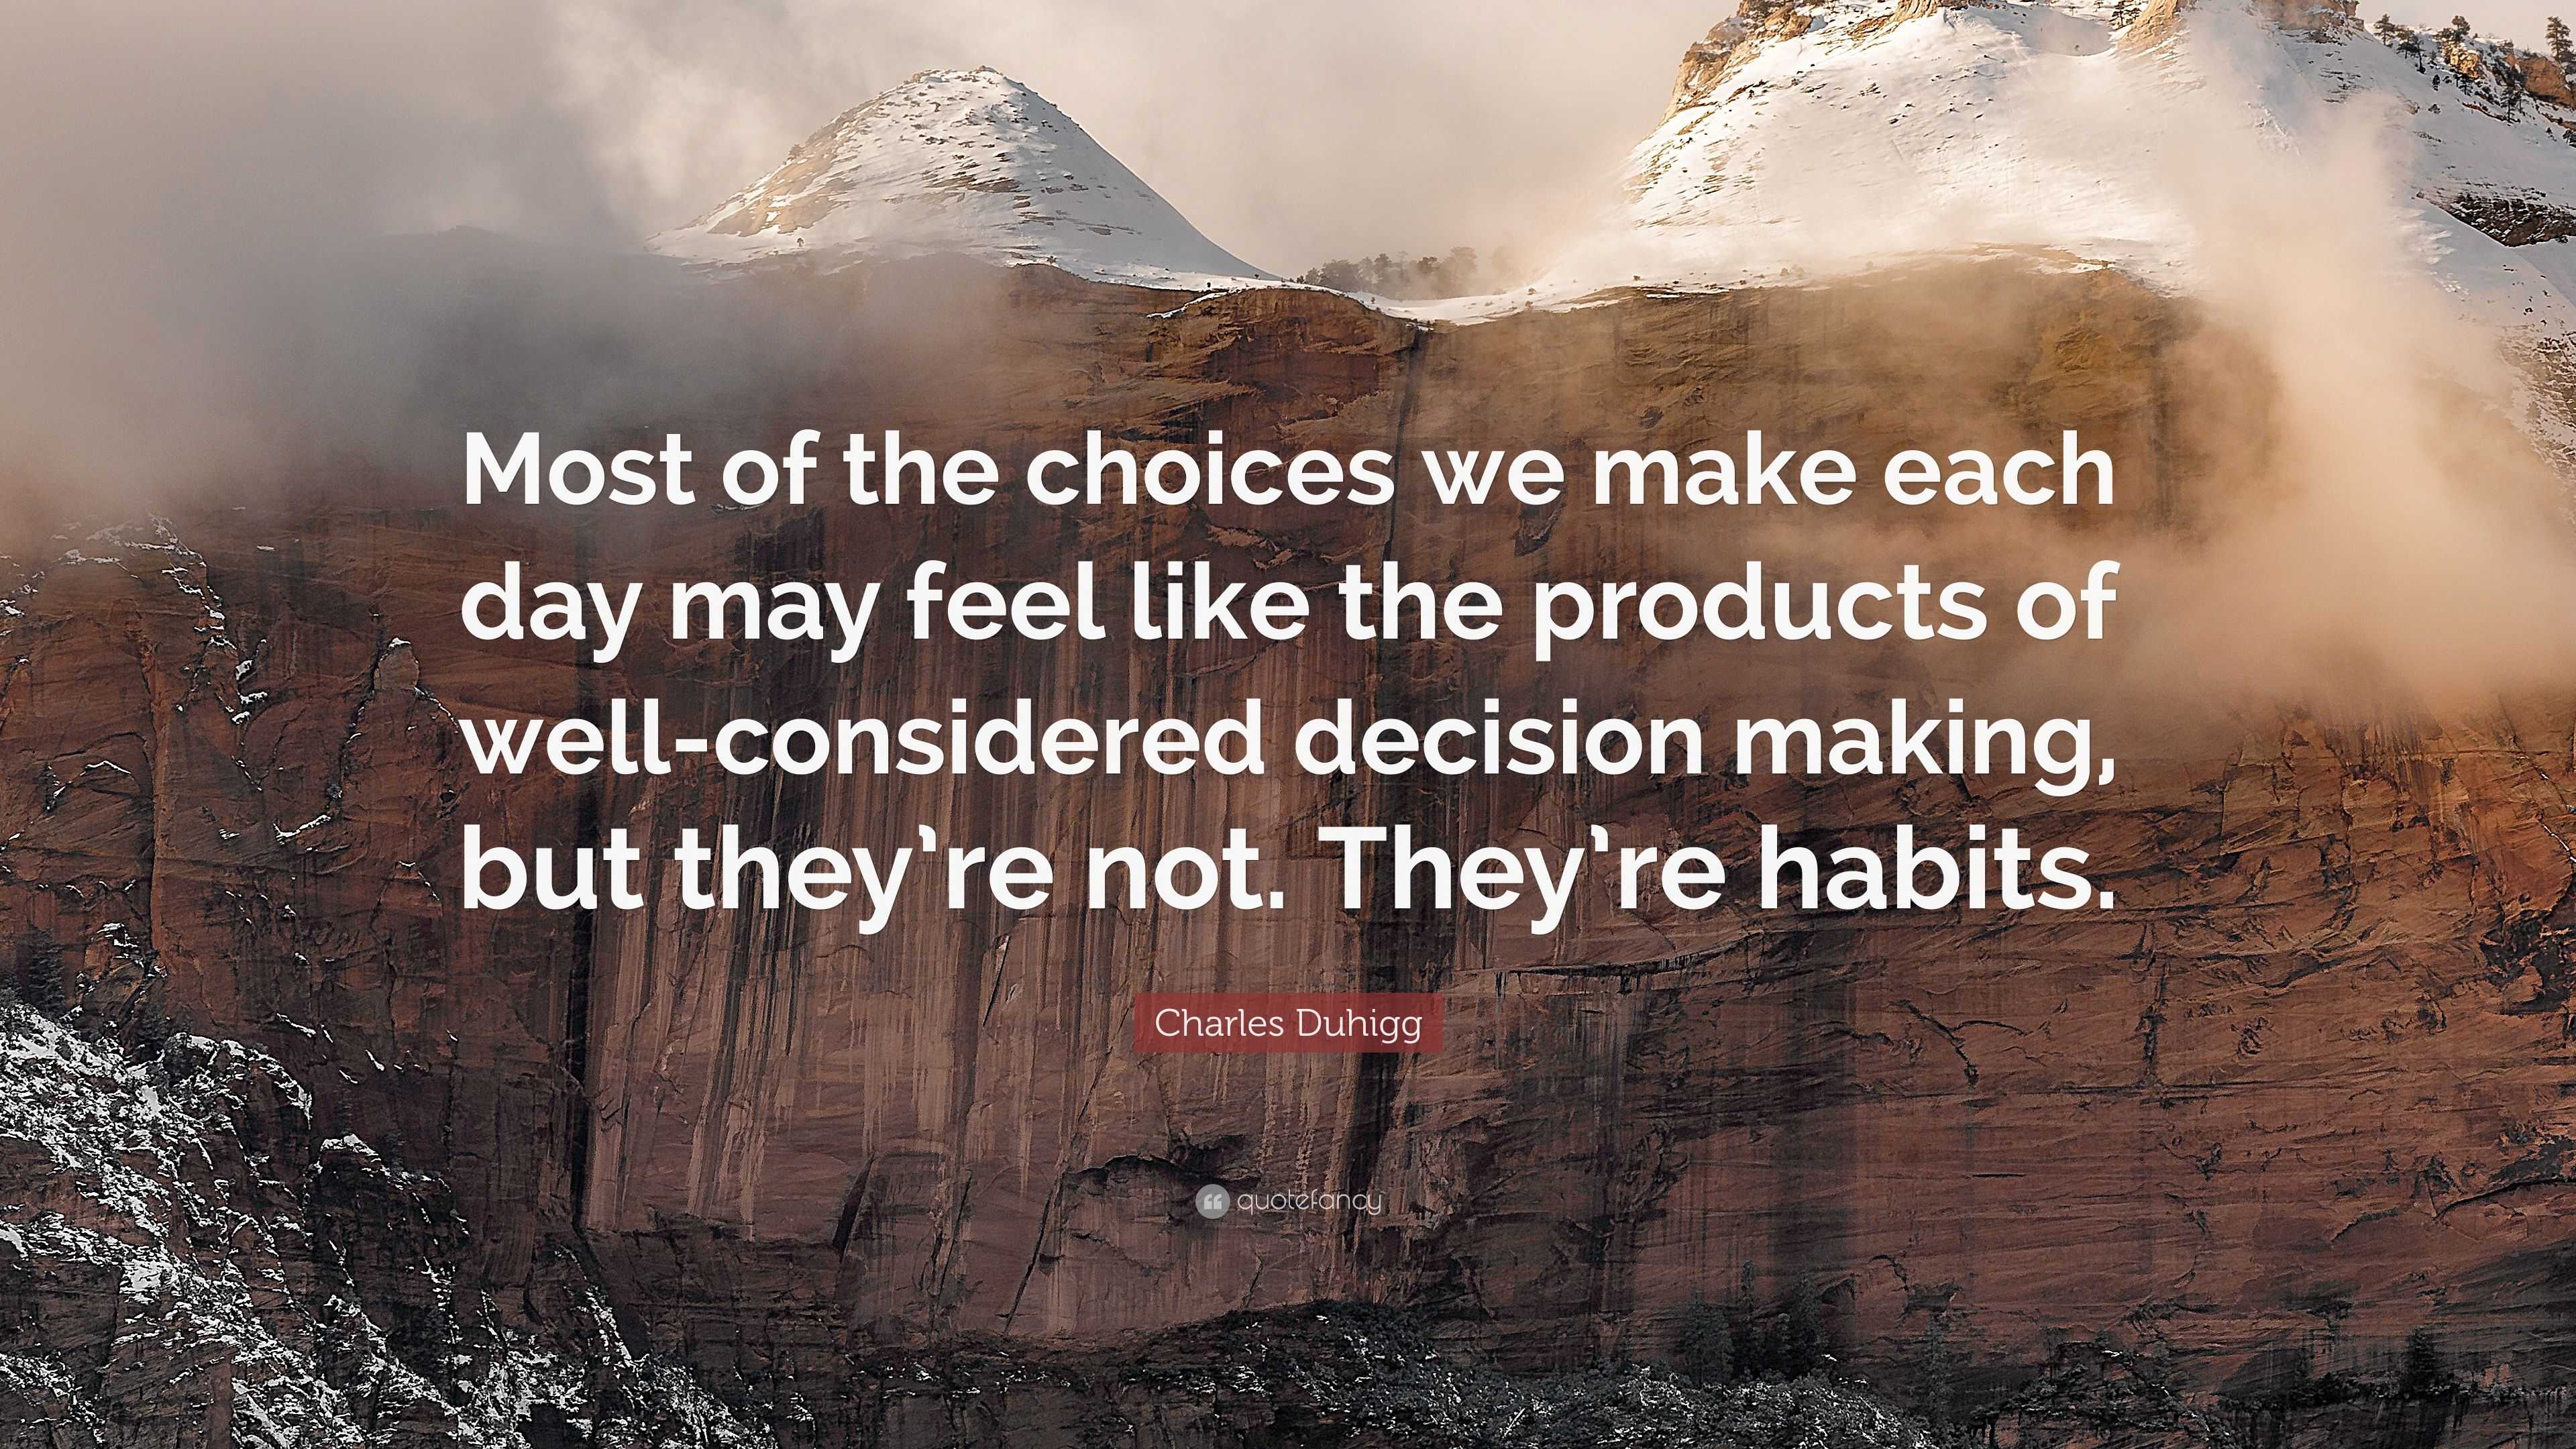 Charles Duhigg Quote: “Most of the choices we make each day may feel